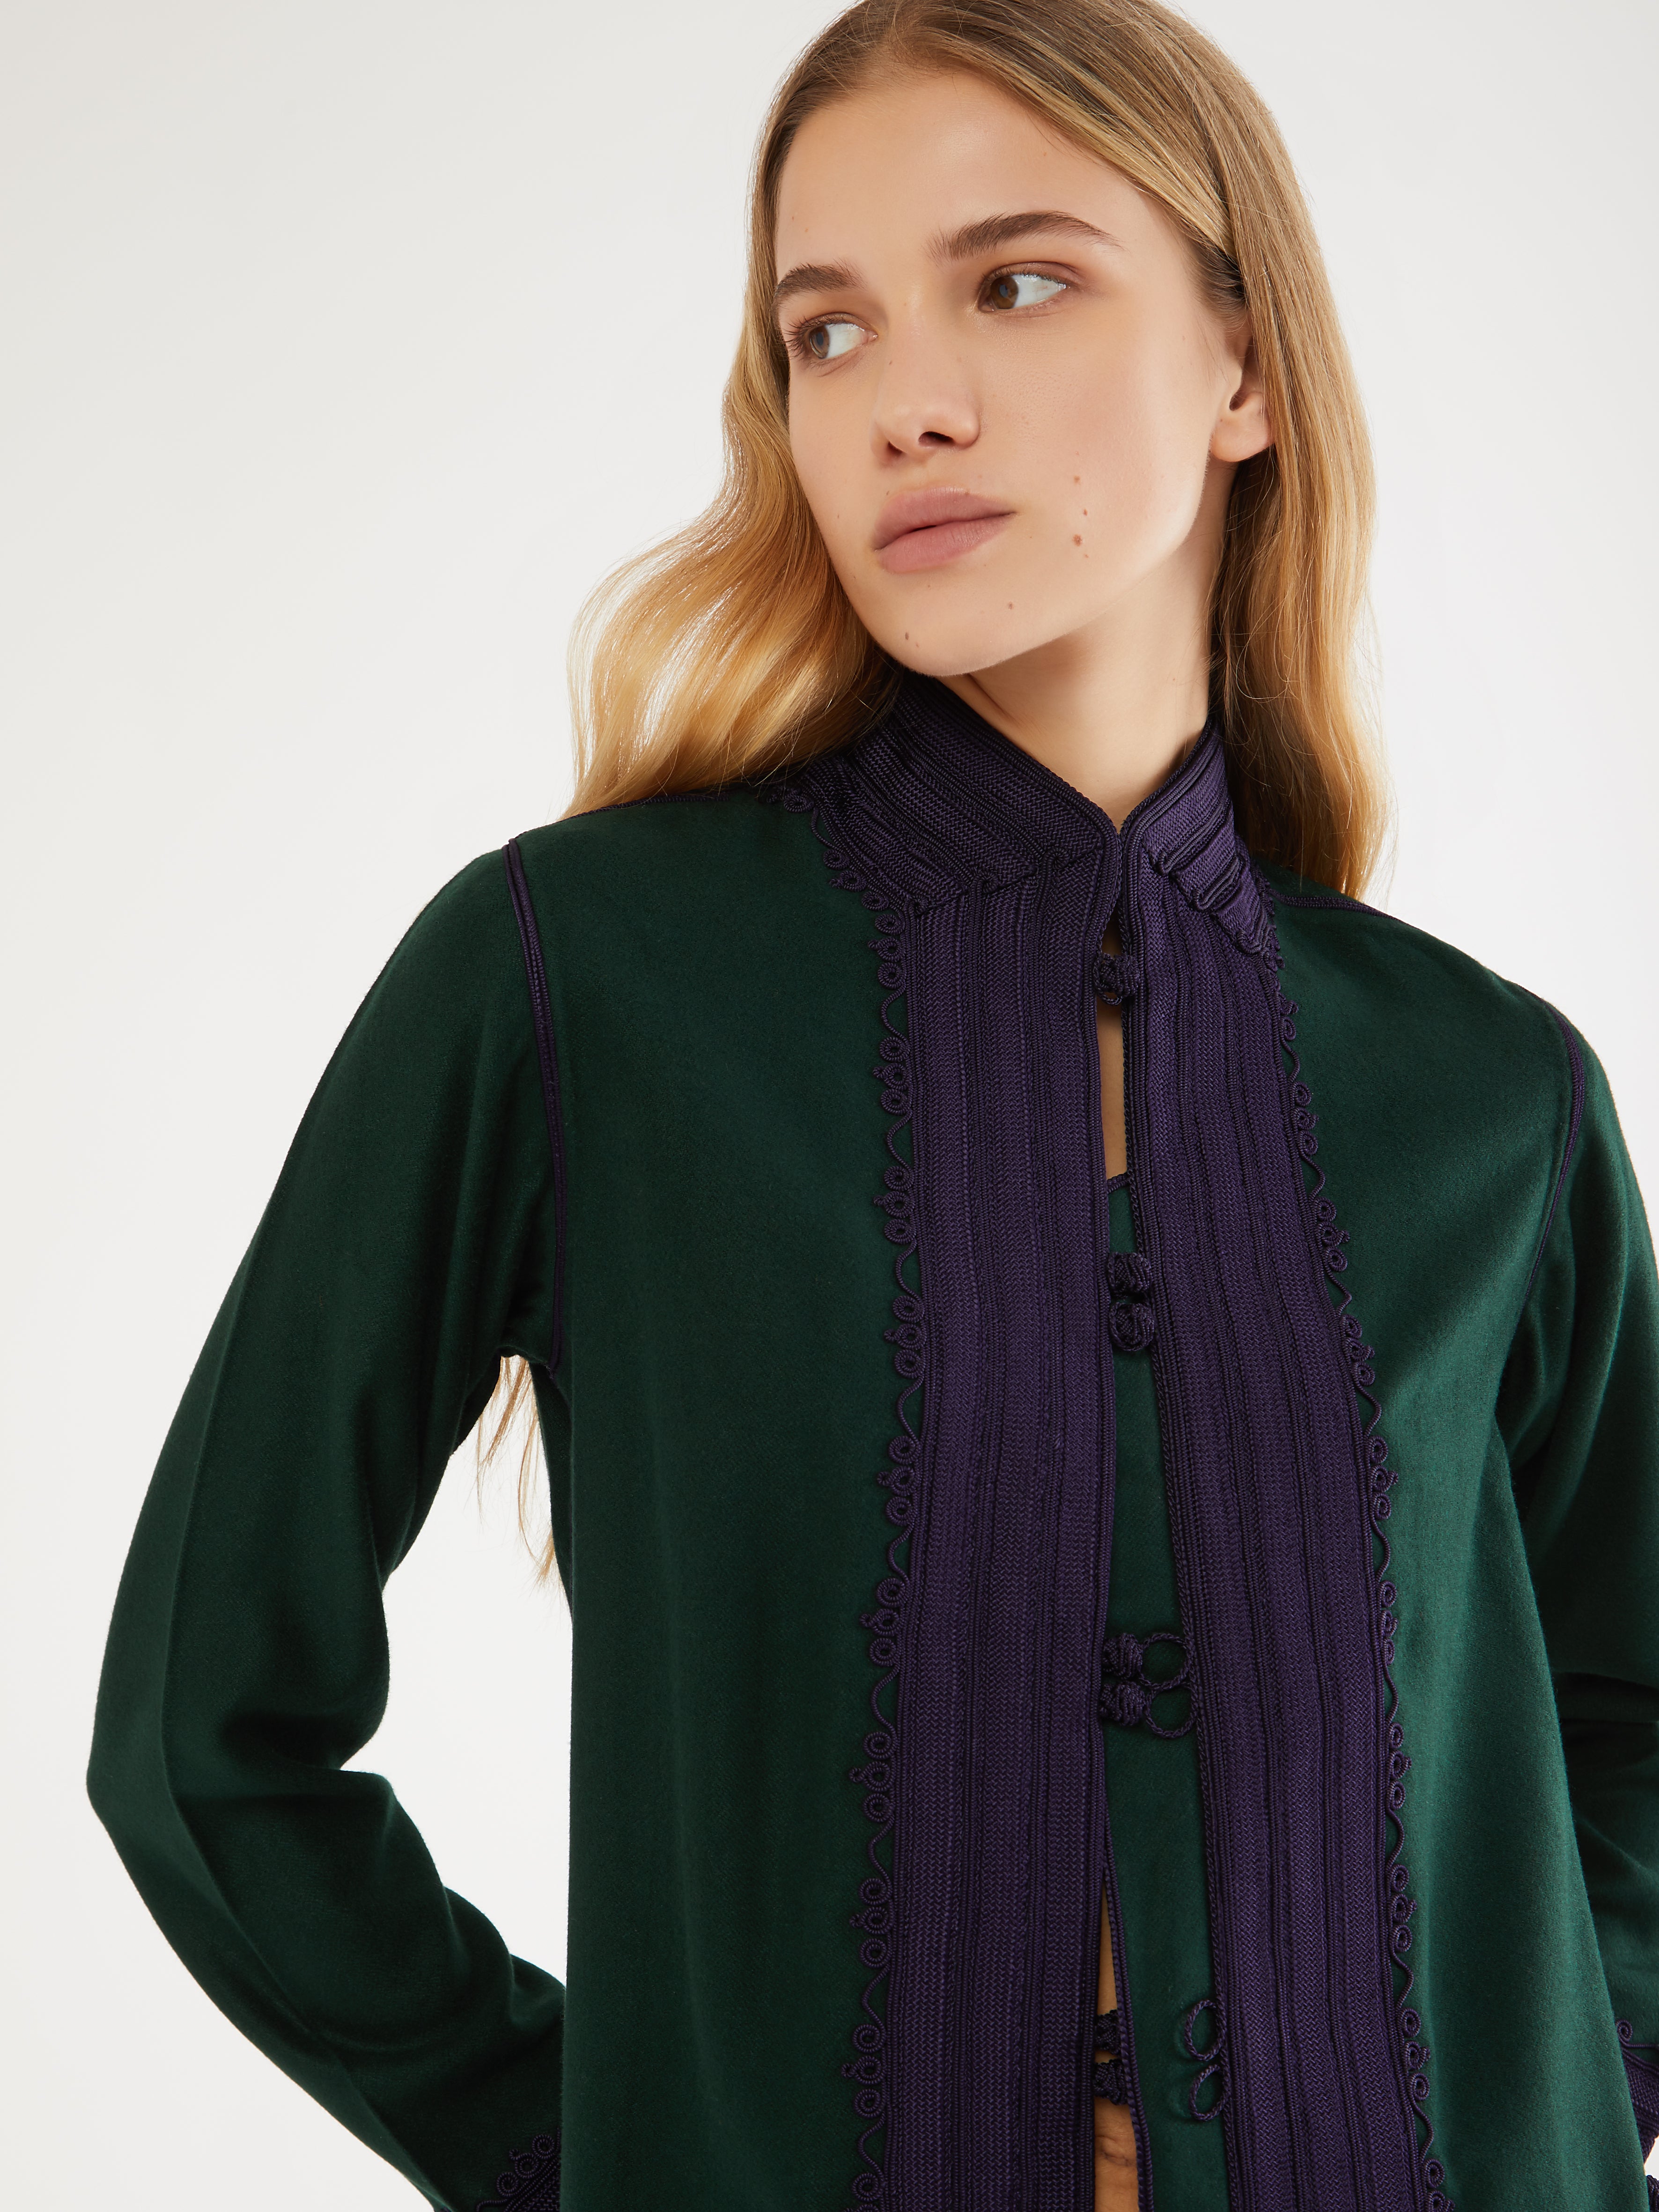 Moroccan cashmere jacket